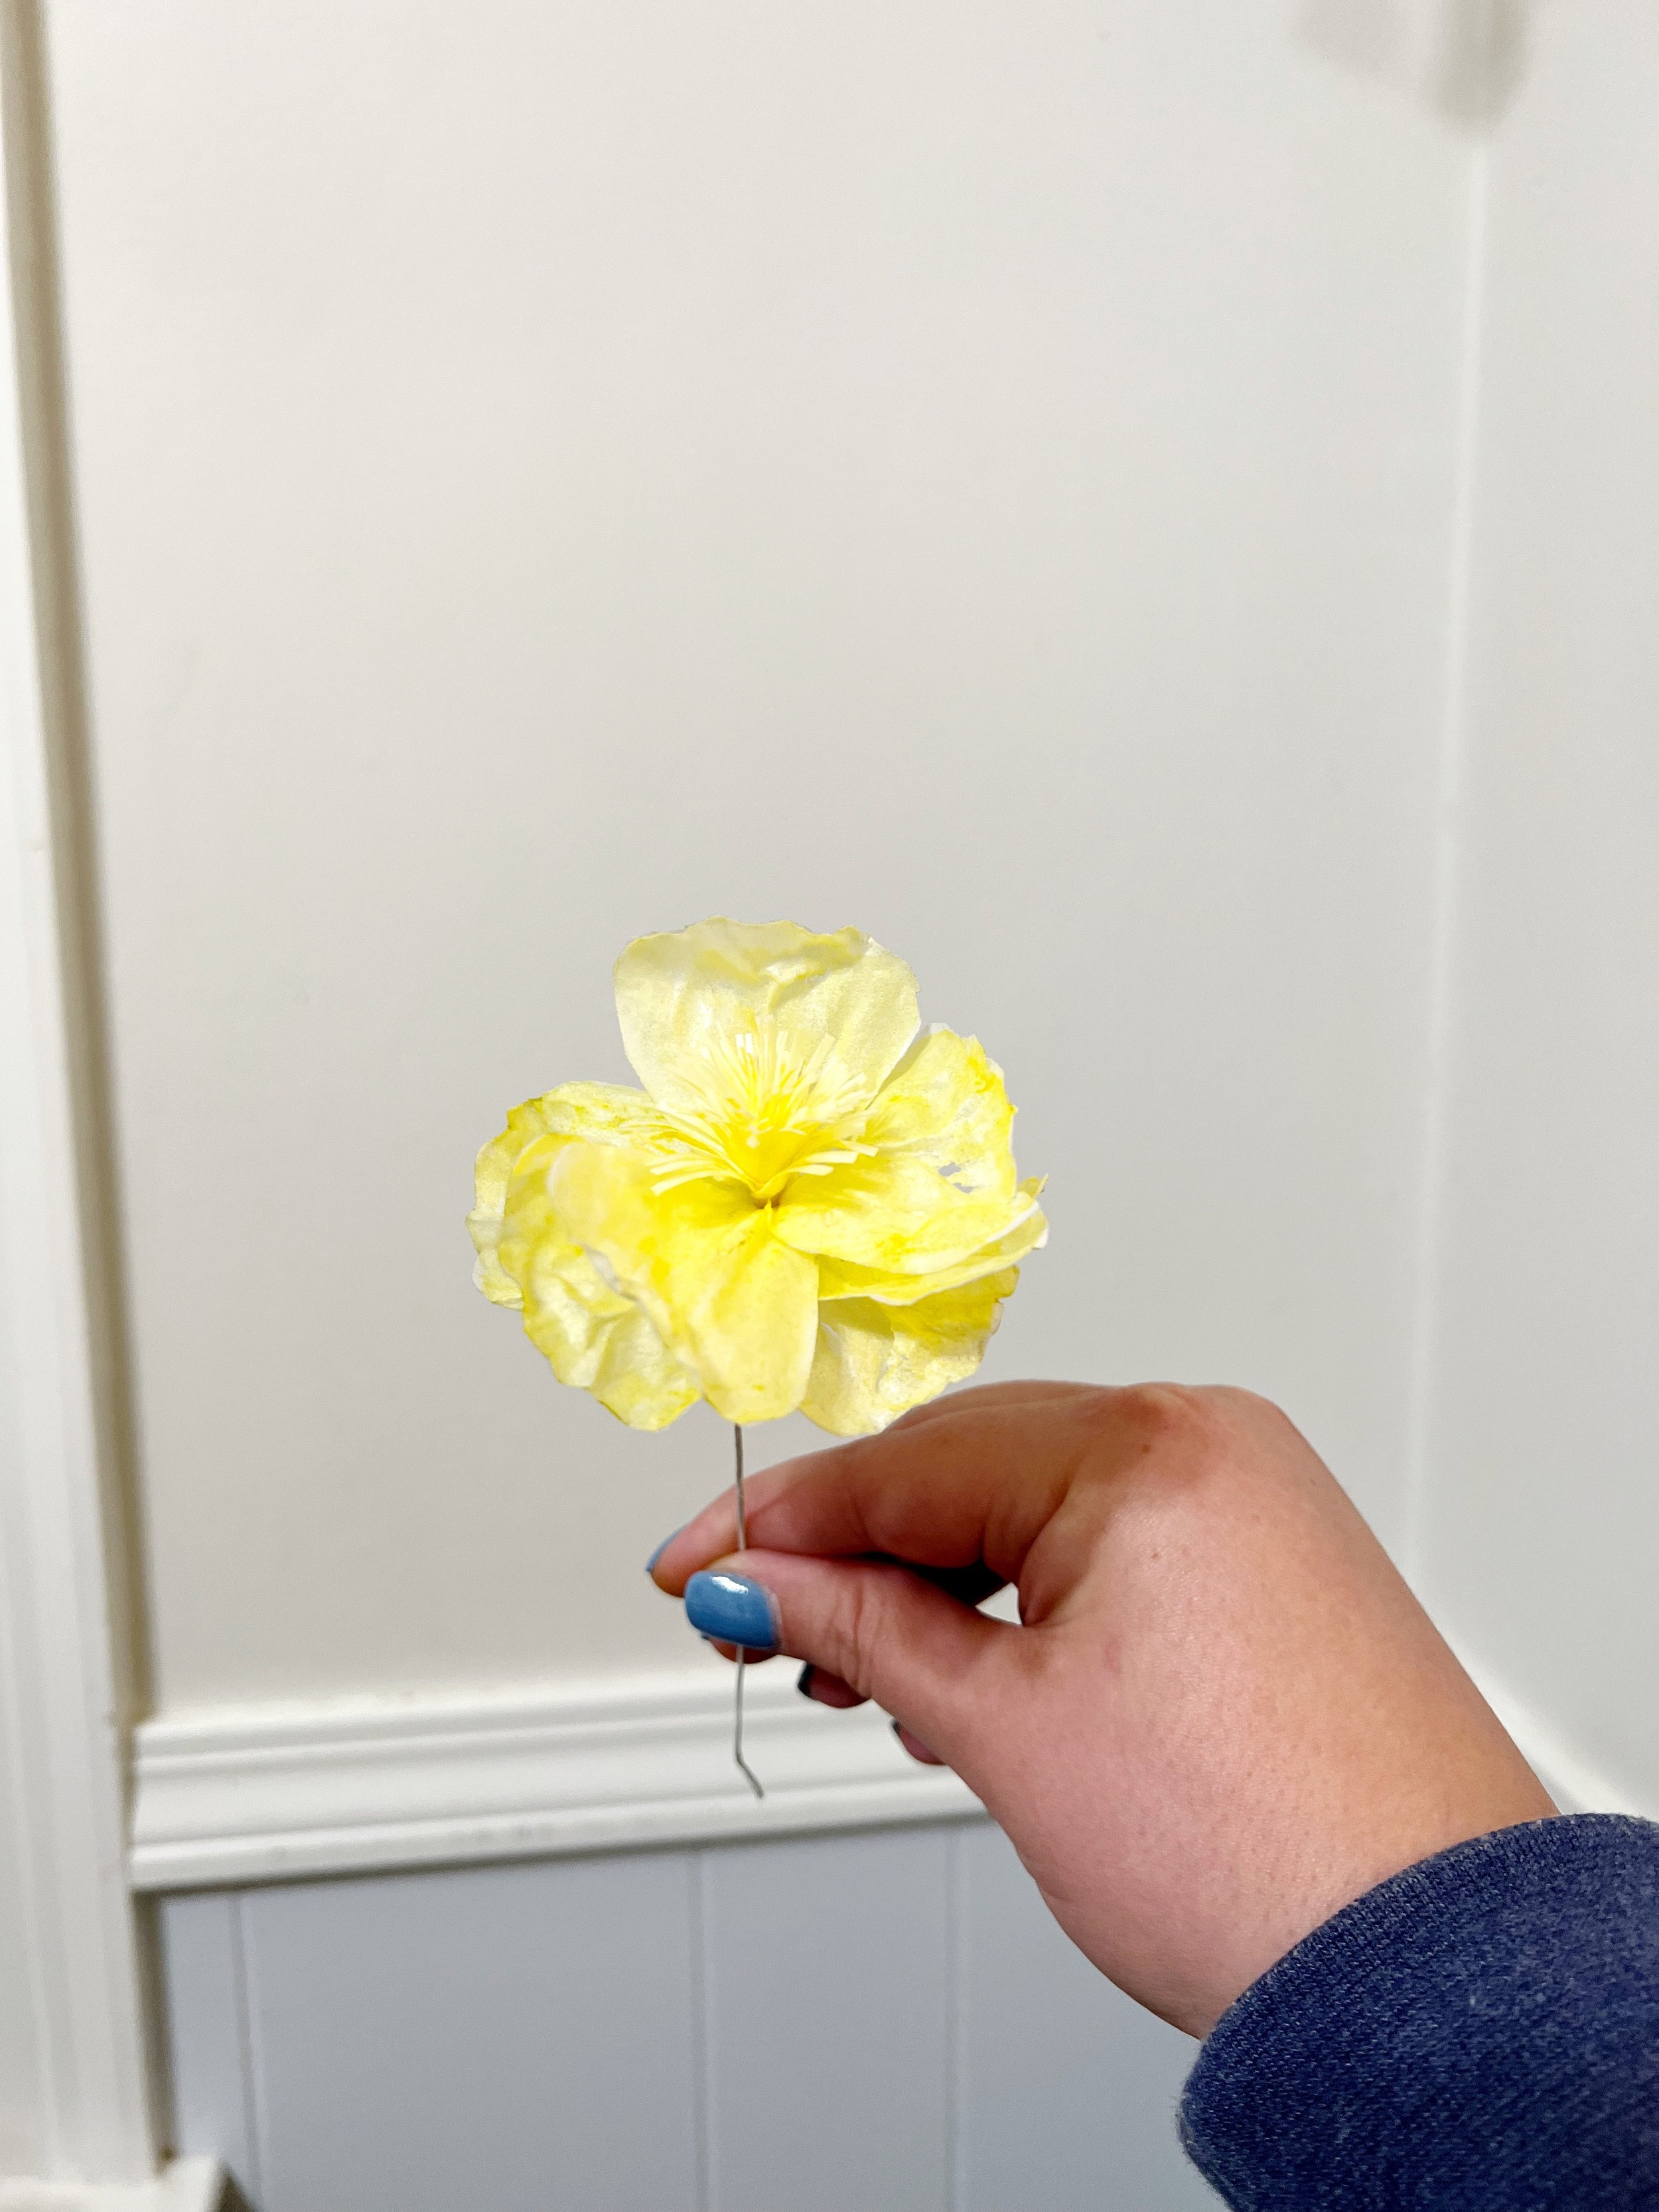 Wafer paper flowers and finding beauty in slow growth — Olivia Adams